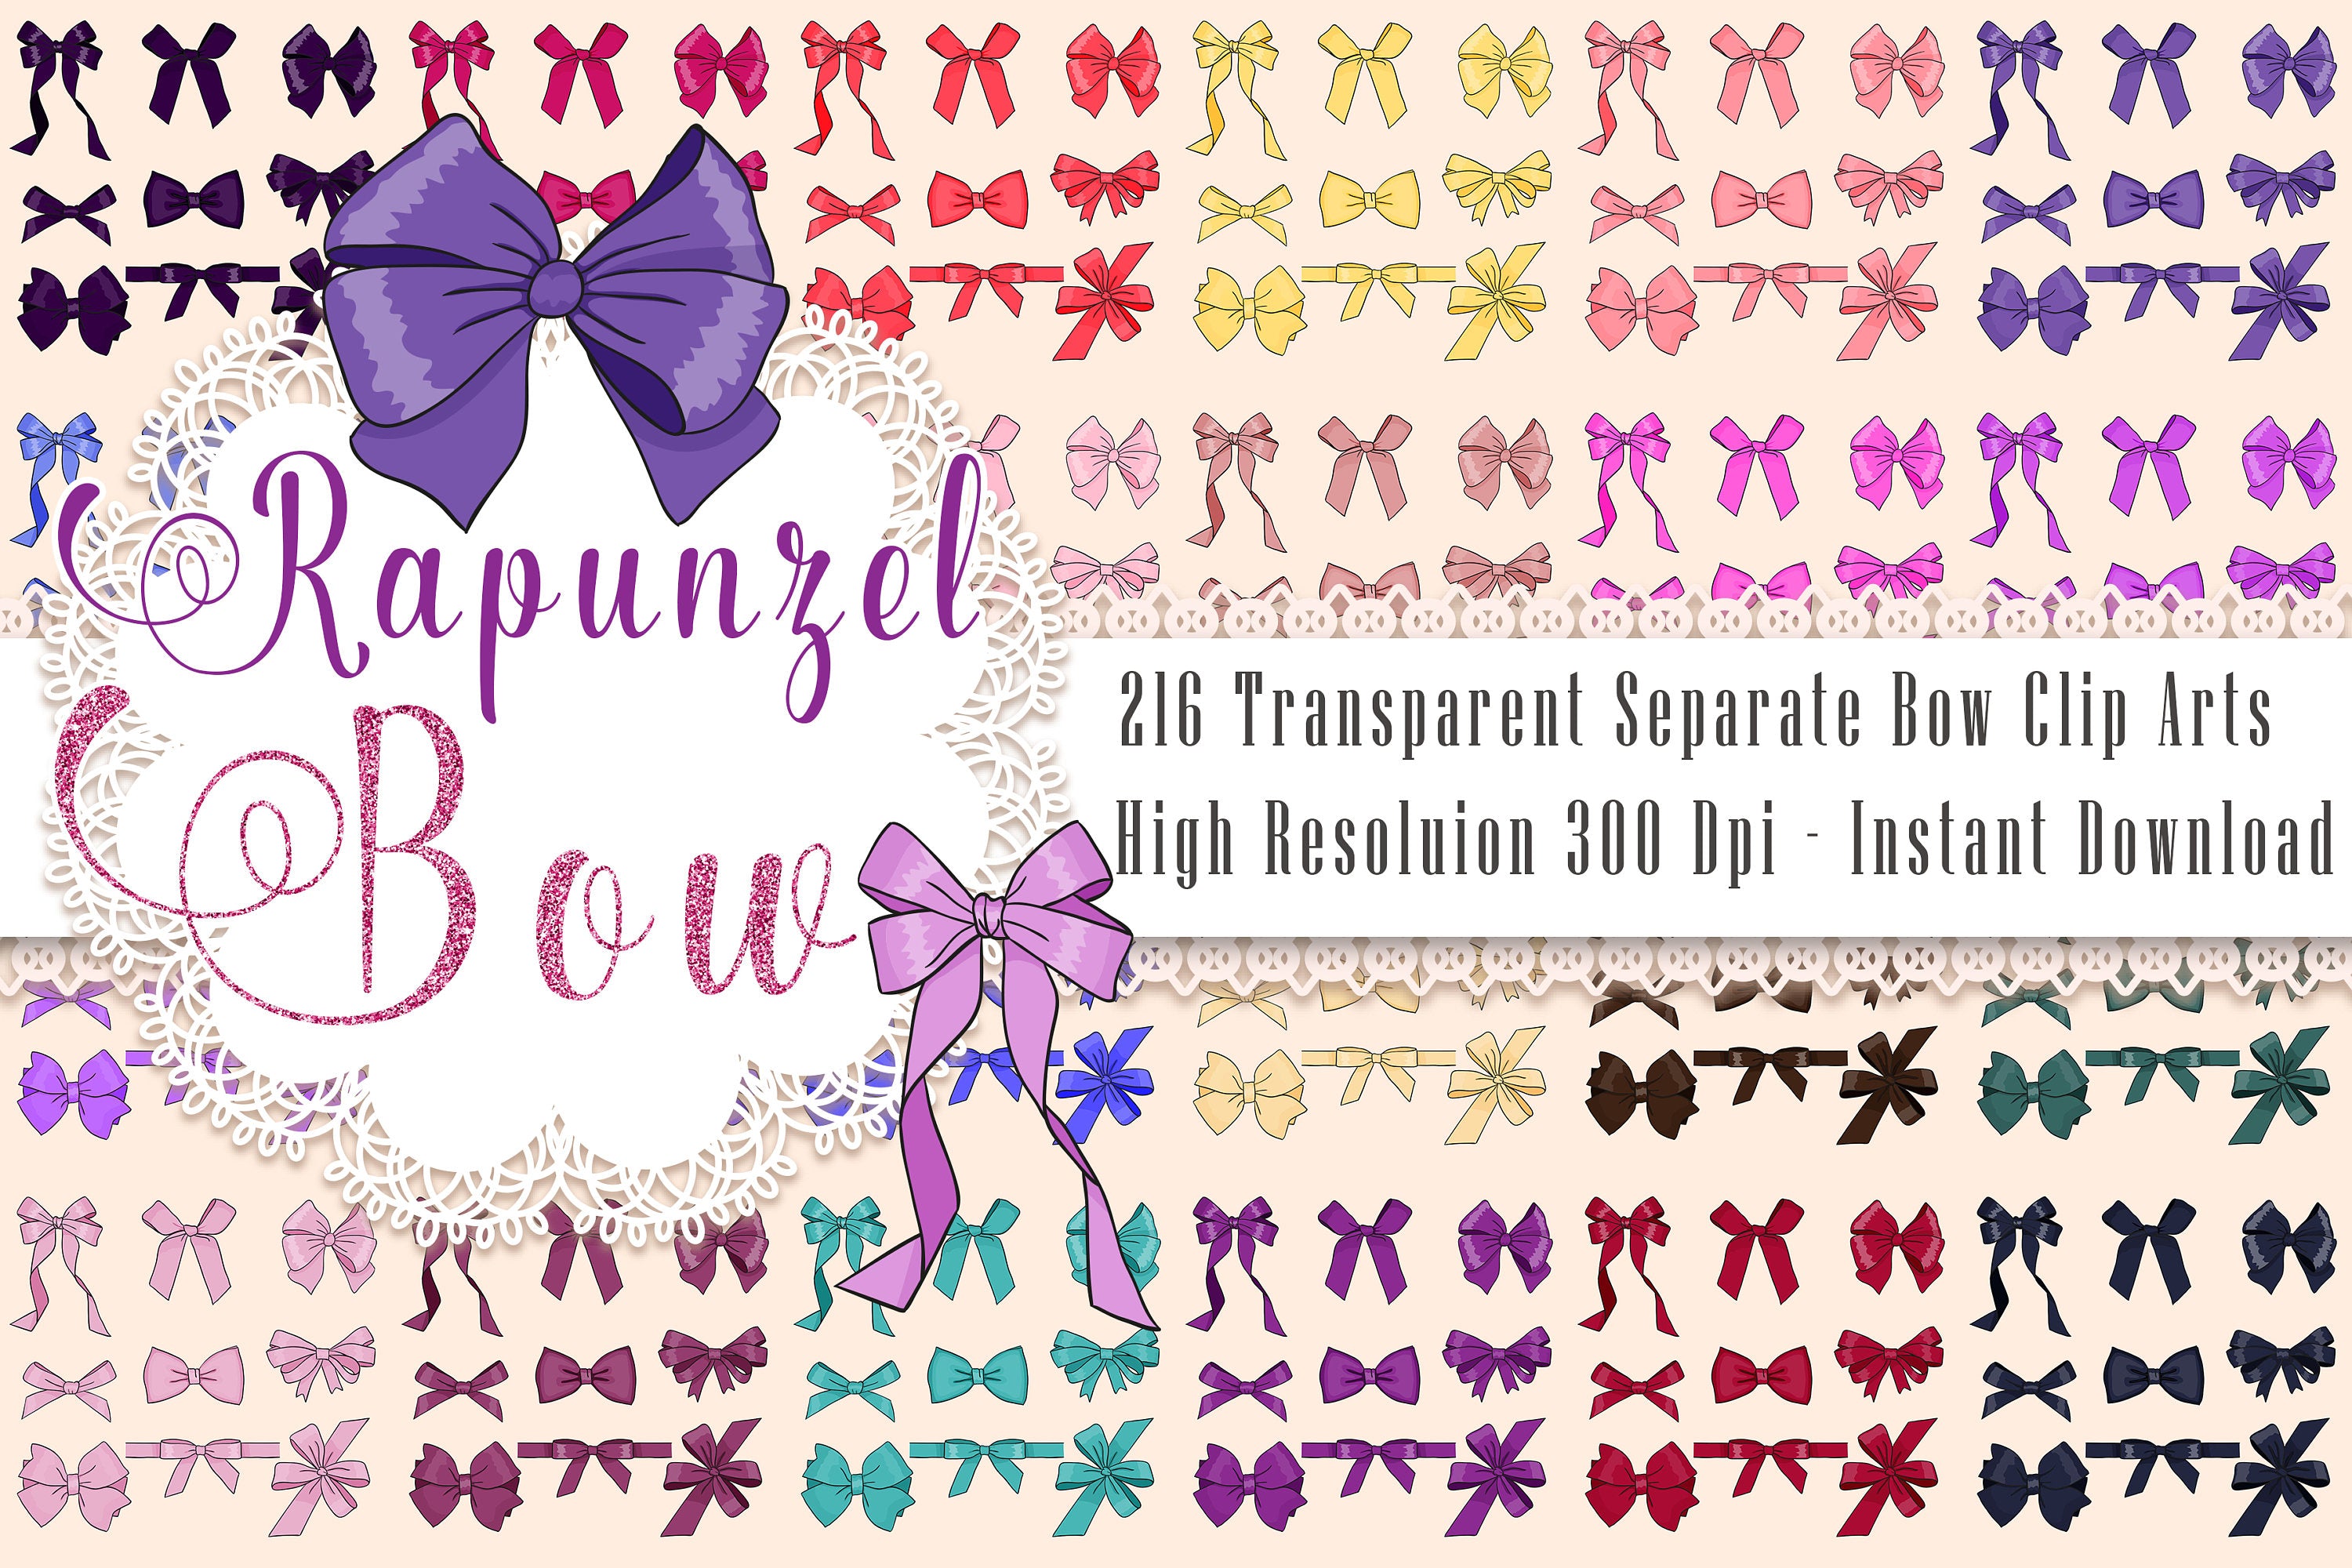 216 Bow Clip Arts, Instant Download, High Resolution 300 Dpi, Separate and Transparent Clip Arts, Princess Theme Clip Arts, Commercial Use